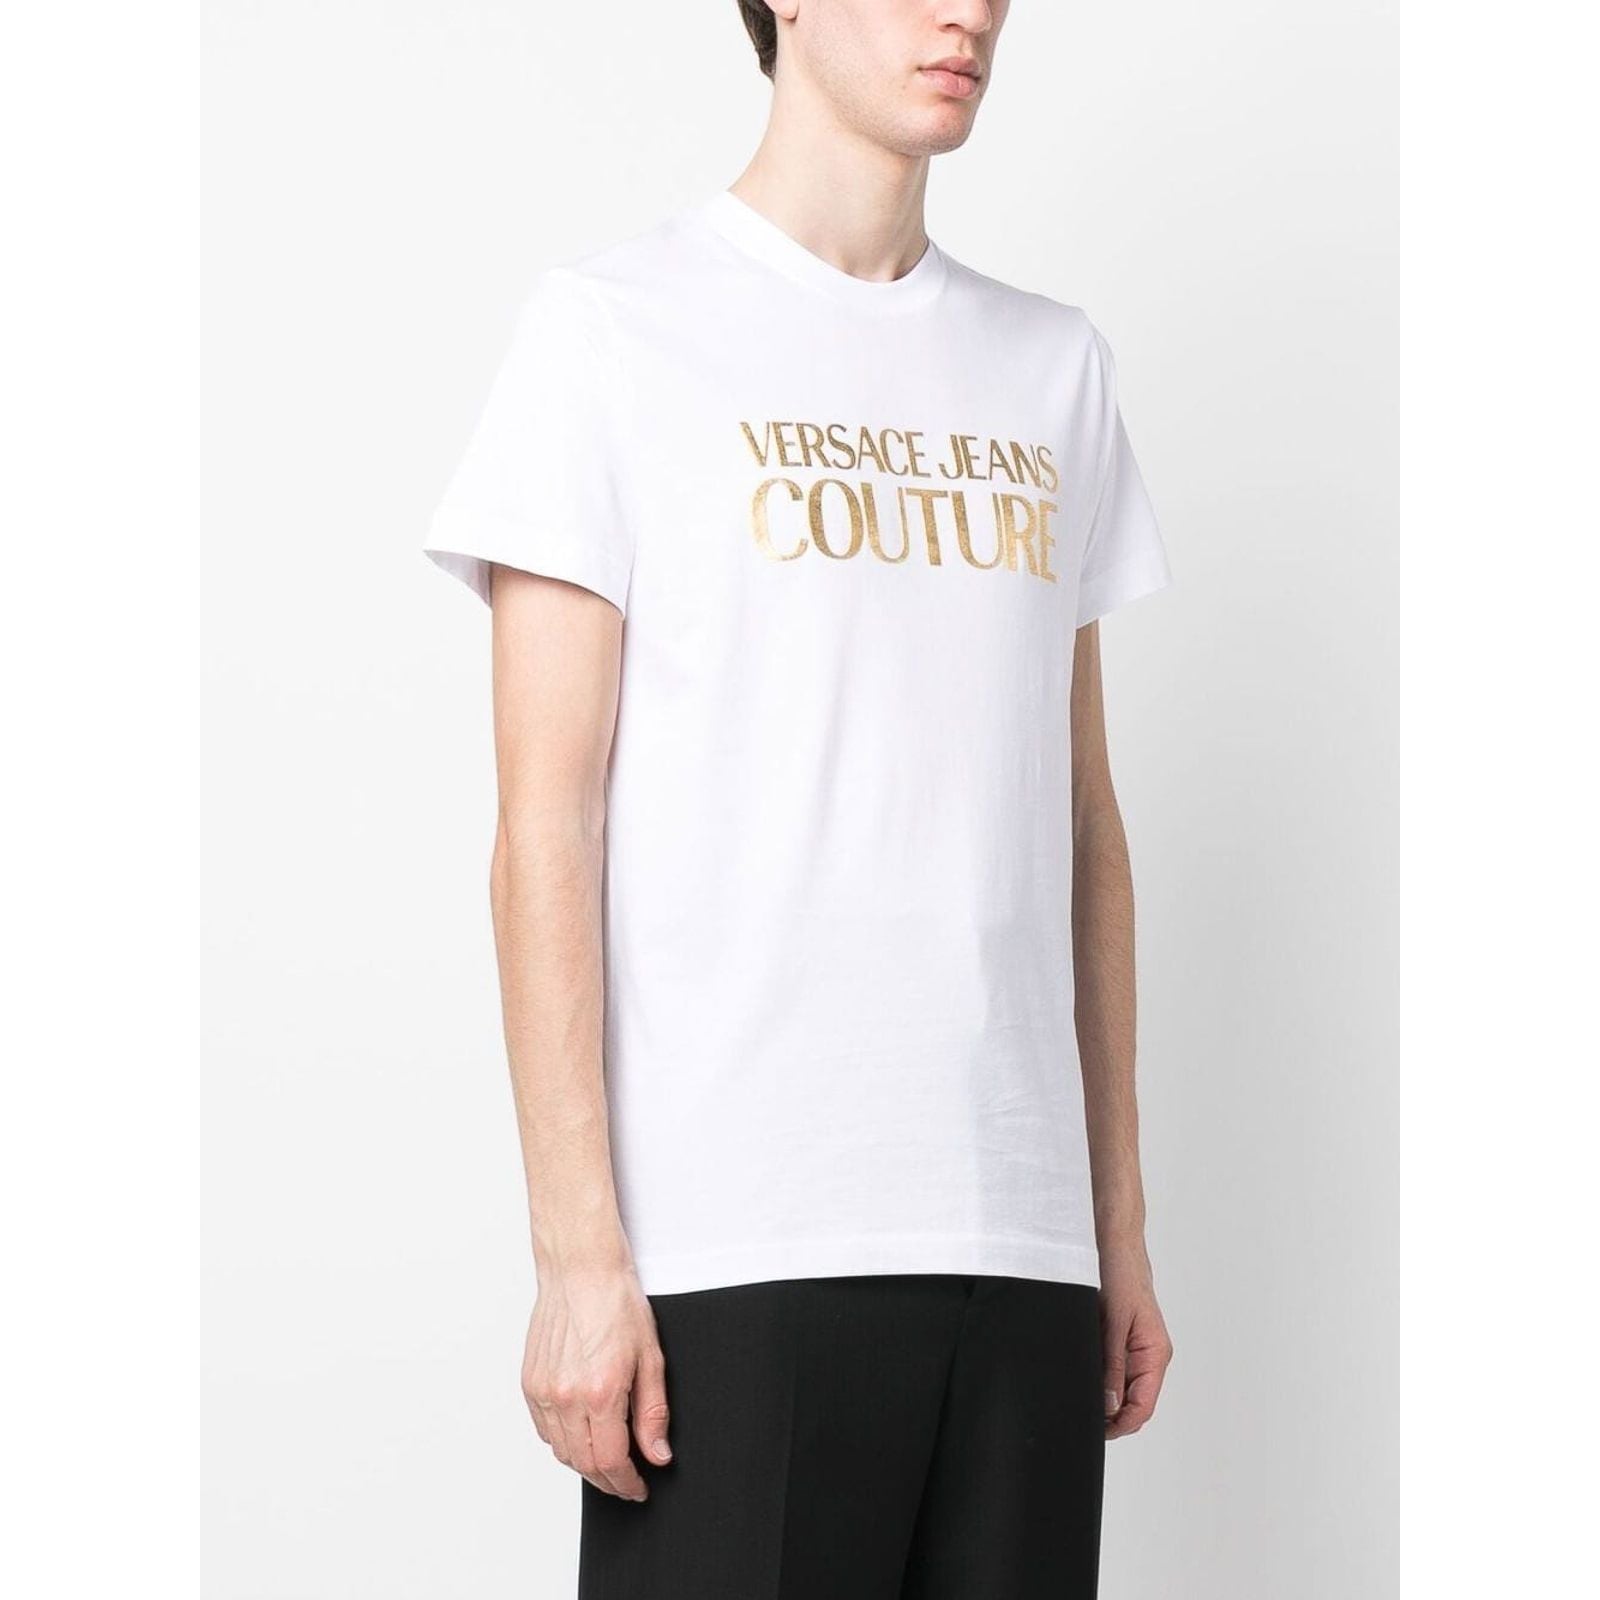 VERSACE JEANS COUTURE LOGO PRINTED COTTON T-SHIRT - Yooto